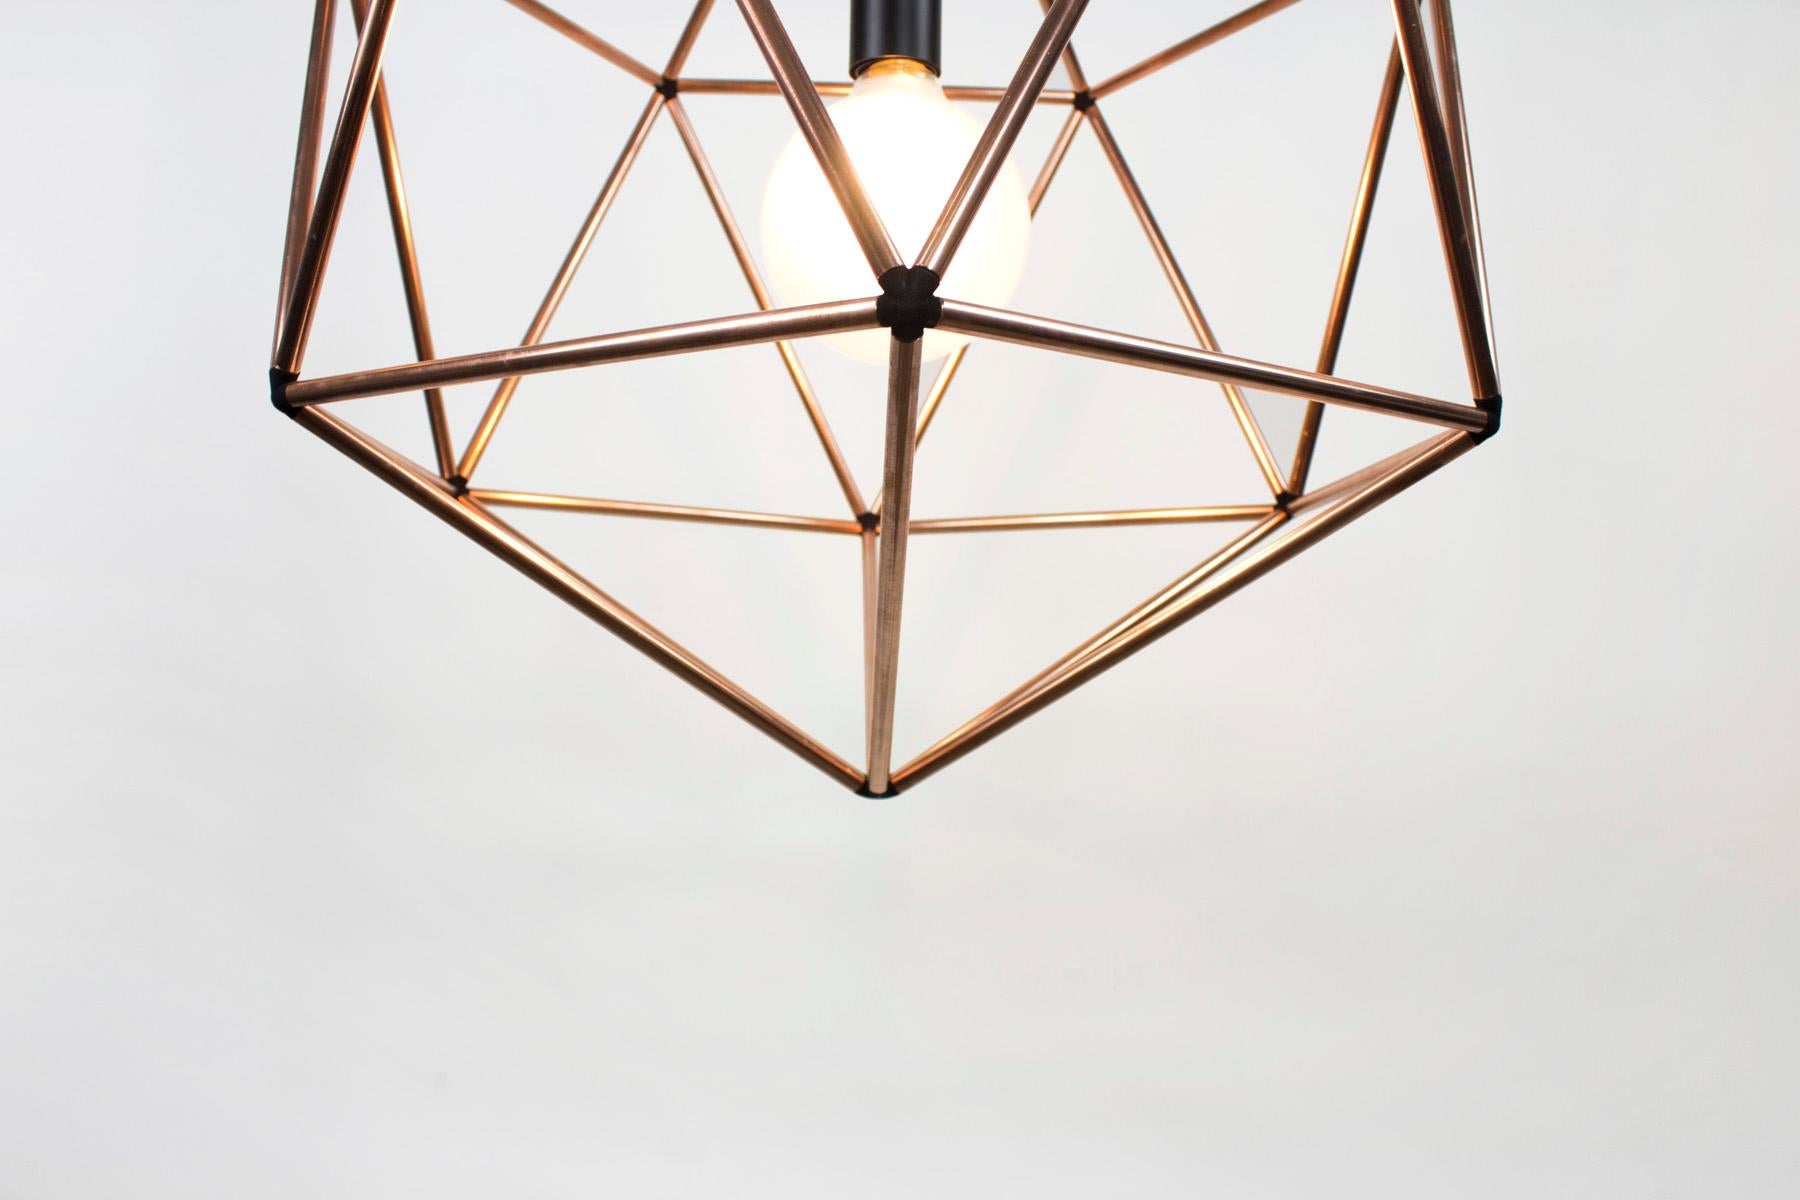 Rough diamond pendant is a decorative fixture that combines handmade craftsmanship with digital technology. The design combines a 3D printed joining system with handcut and assembled copper or brass tube. The result is a decorative feature light